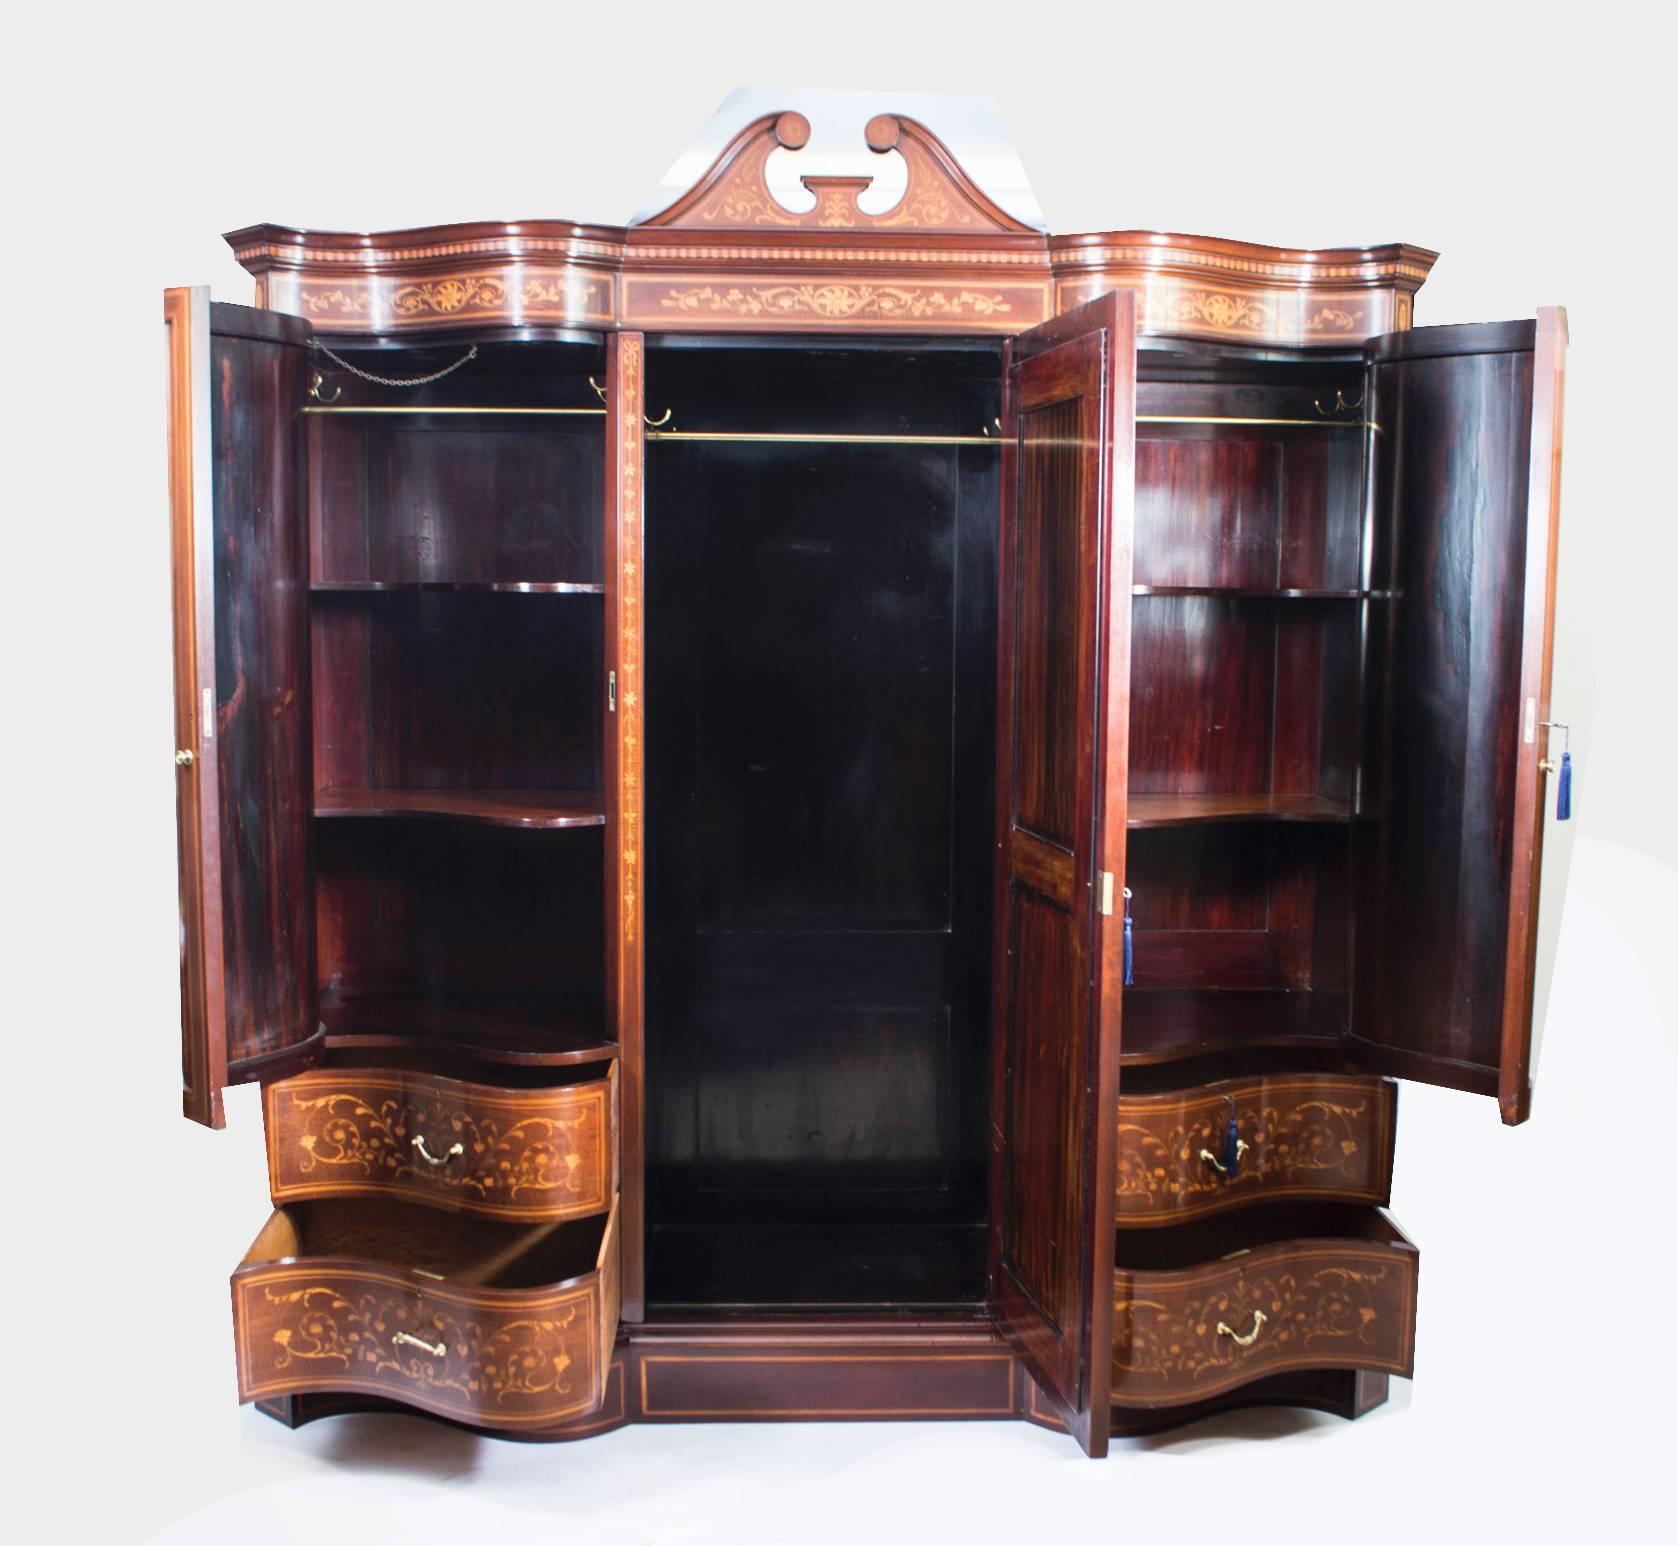 This is a spectacular antique late Victorian mahogany and floral marquetry serpentine shaped wardrobe bearing the engraved brass plaque of the renowned cabinet maker and retailer Edwards & Roberts, circa 1880 in date. It is inlaid with a